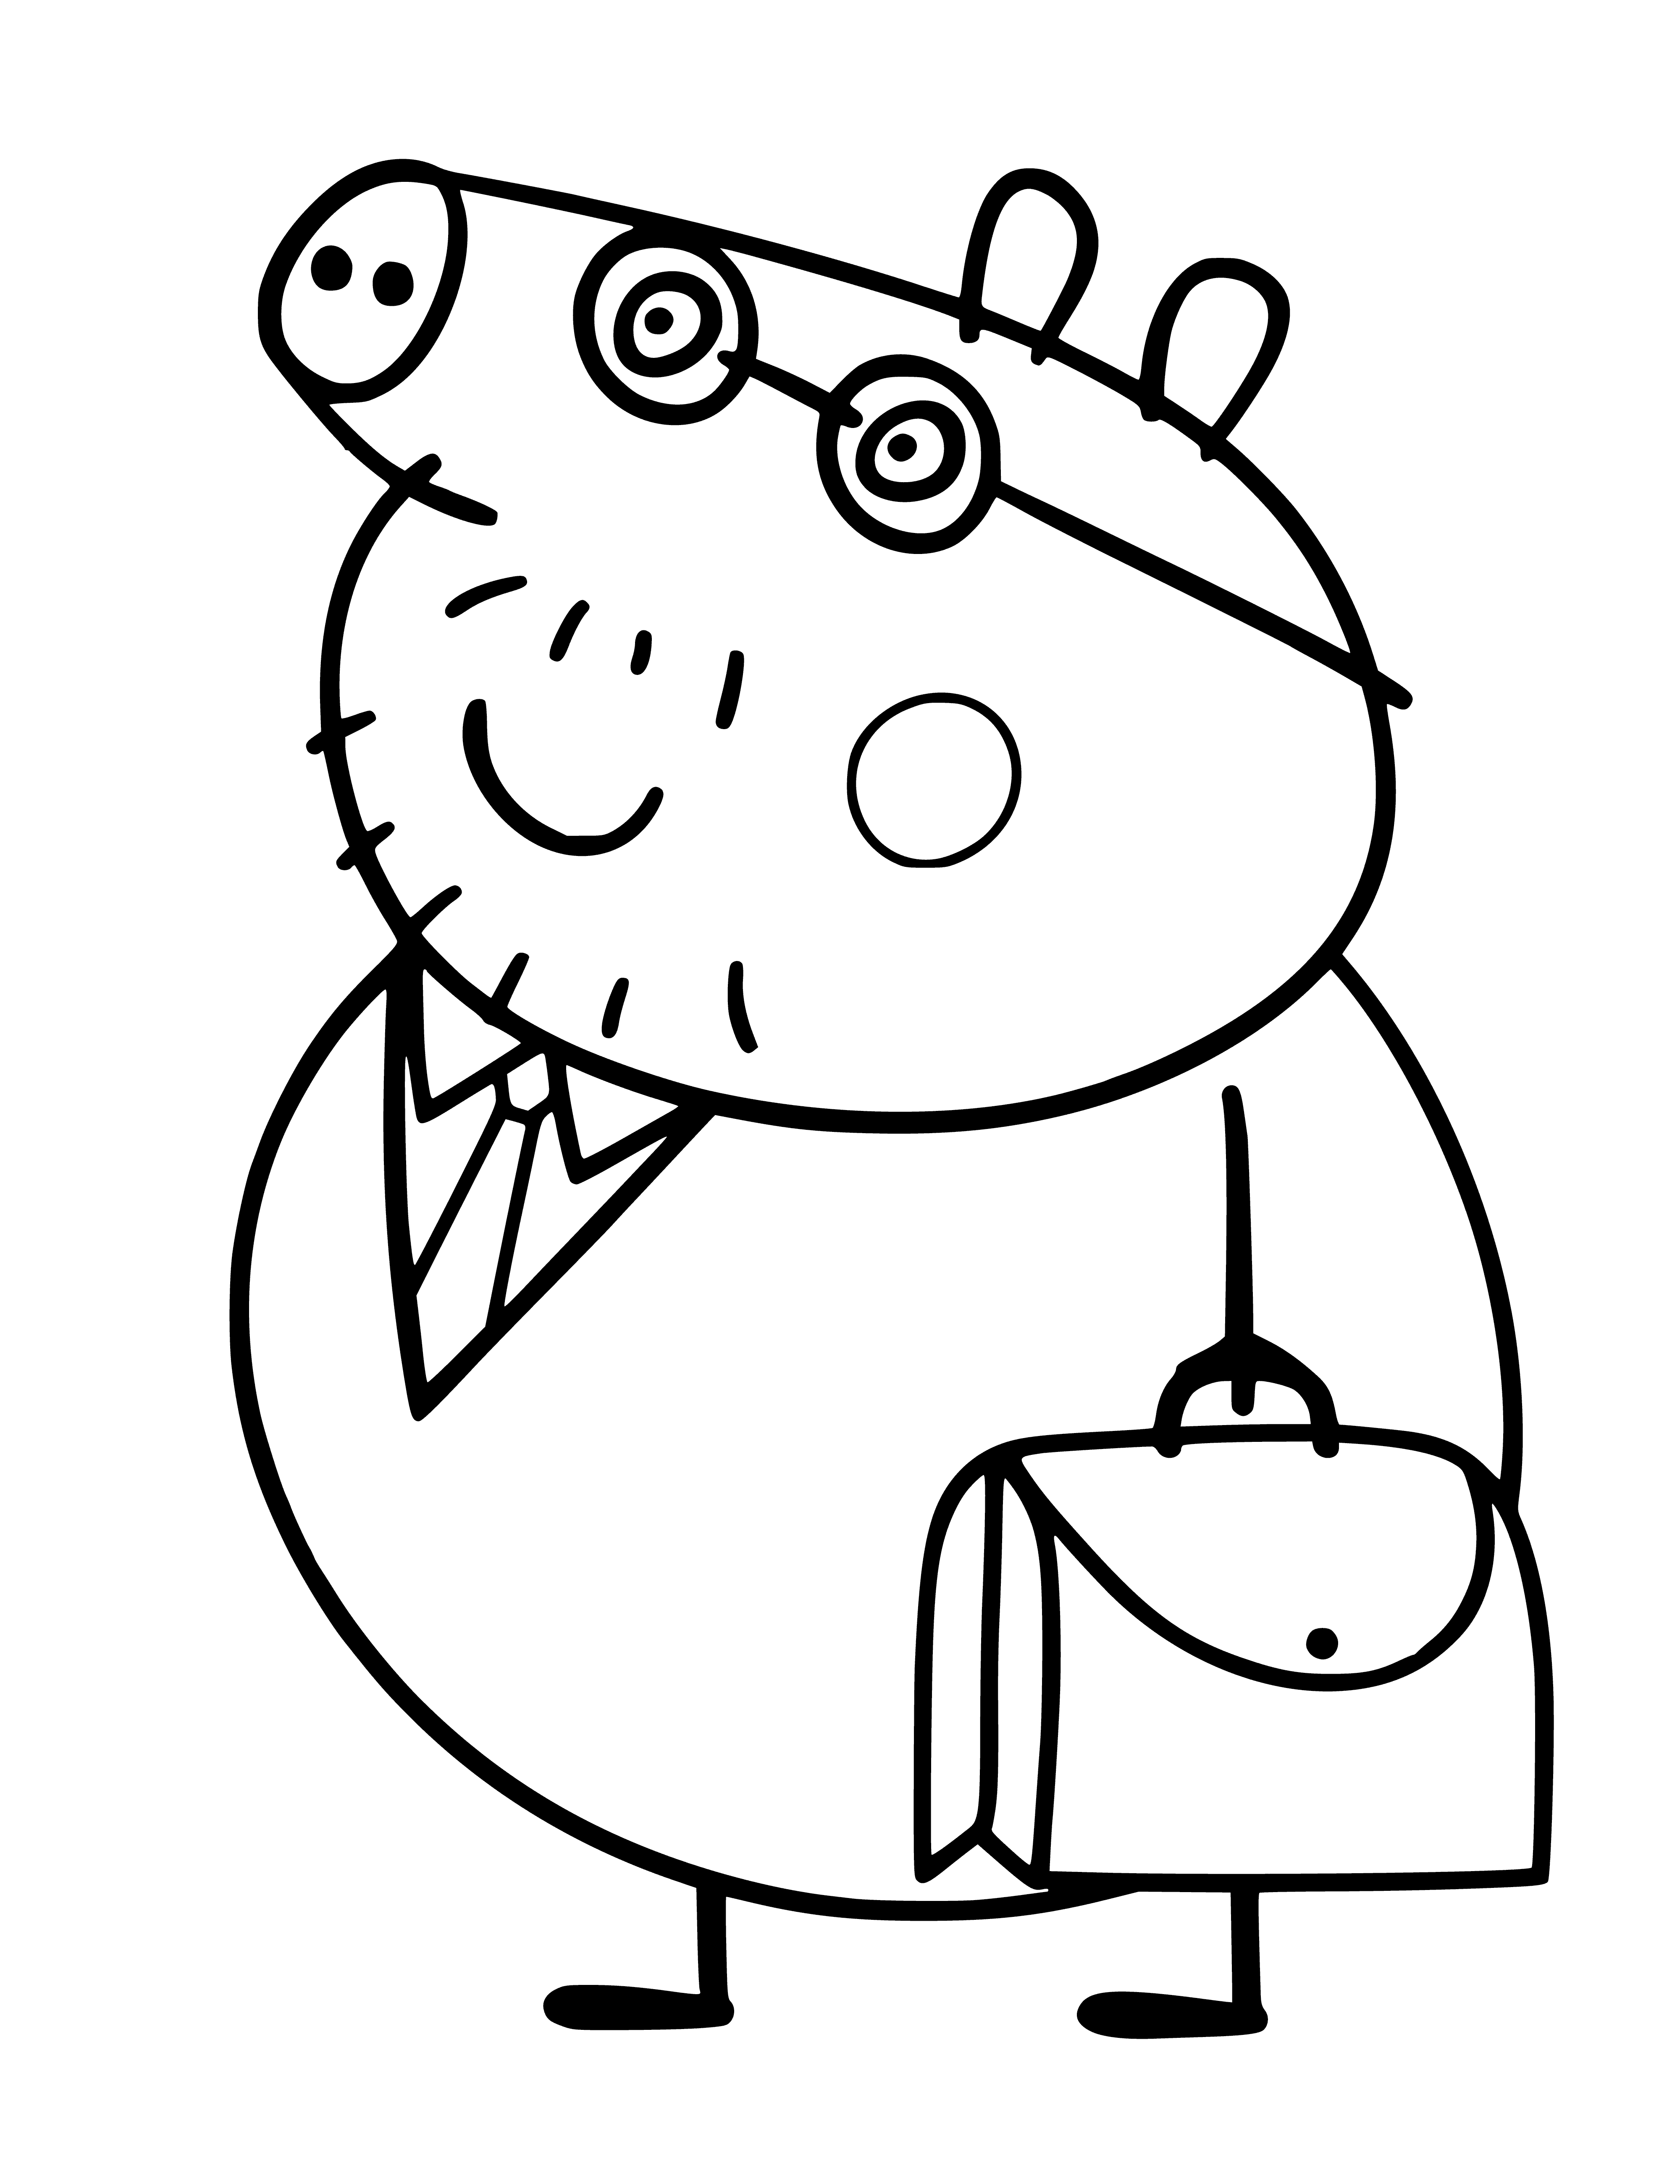 coloring page: Daddy Pig puts on his tie in front of a mirror while a coffee mug sits on the counter.